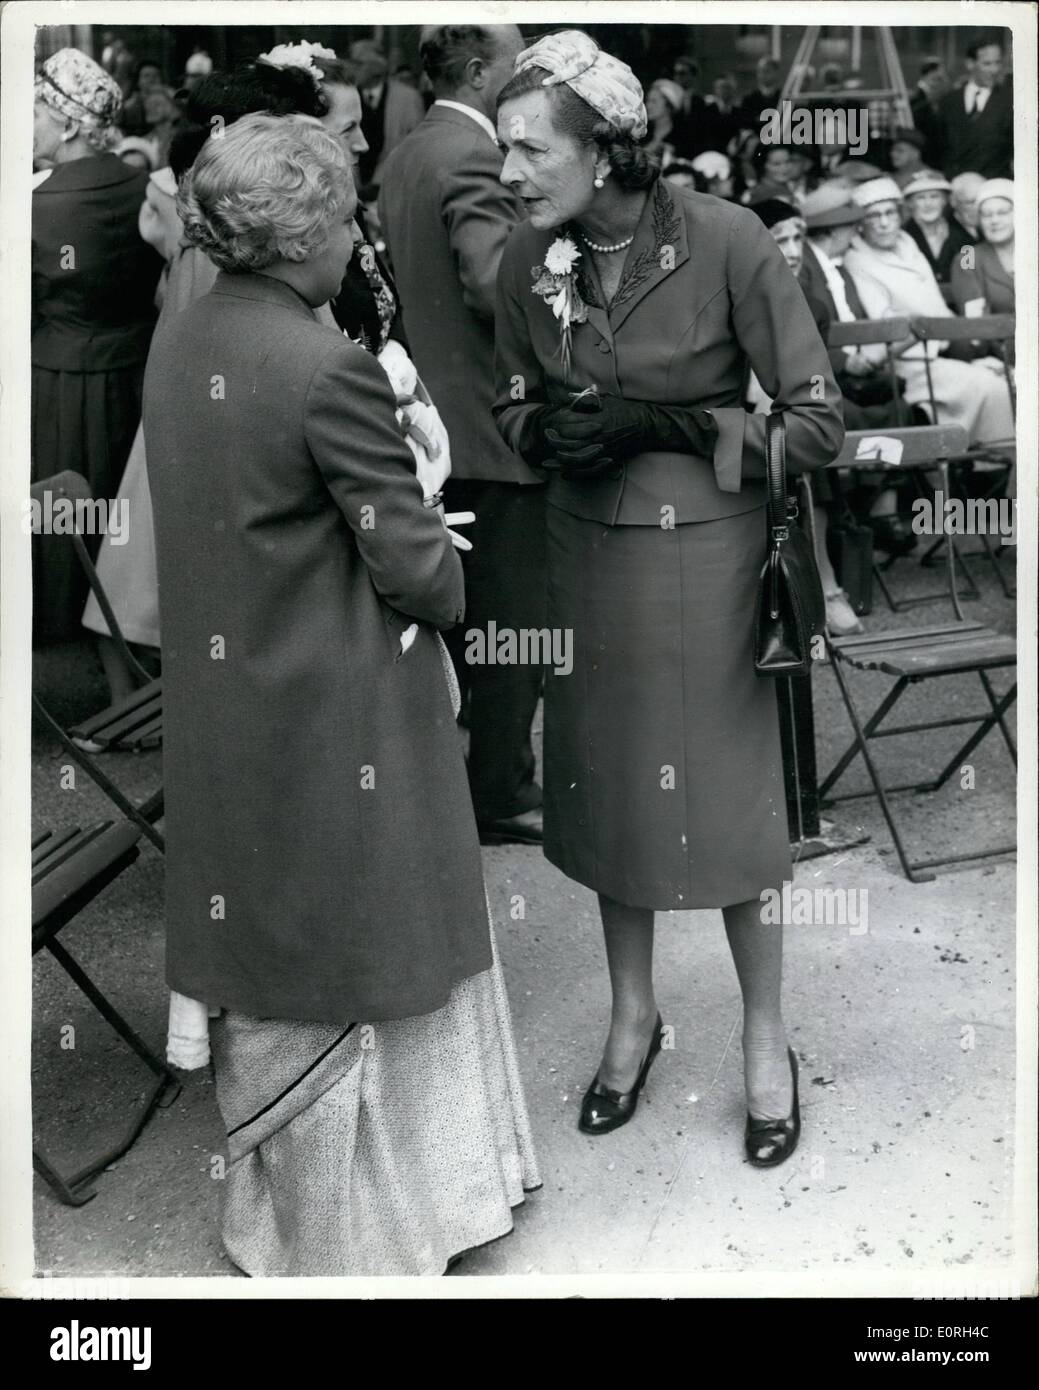 Jul. 07, 1959 - New Memorial to Dame Christabel Pankhurst Unveiled: A new memorial to Dame Christabel Pankhurst which has been added to the statue of her mother Mrs. Emmeline Pankhurst, was unveiled this morning at Victoria Gardens, near House of Lords. Photo Shows Lady Mountbatten speaks to Mrs. Pandit the high Commissioner for India - at the ceremony today. Stock Photo